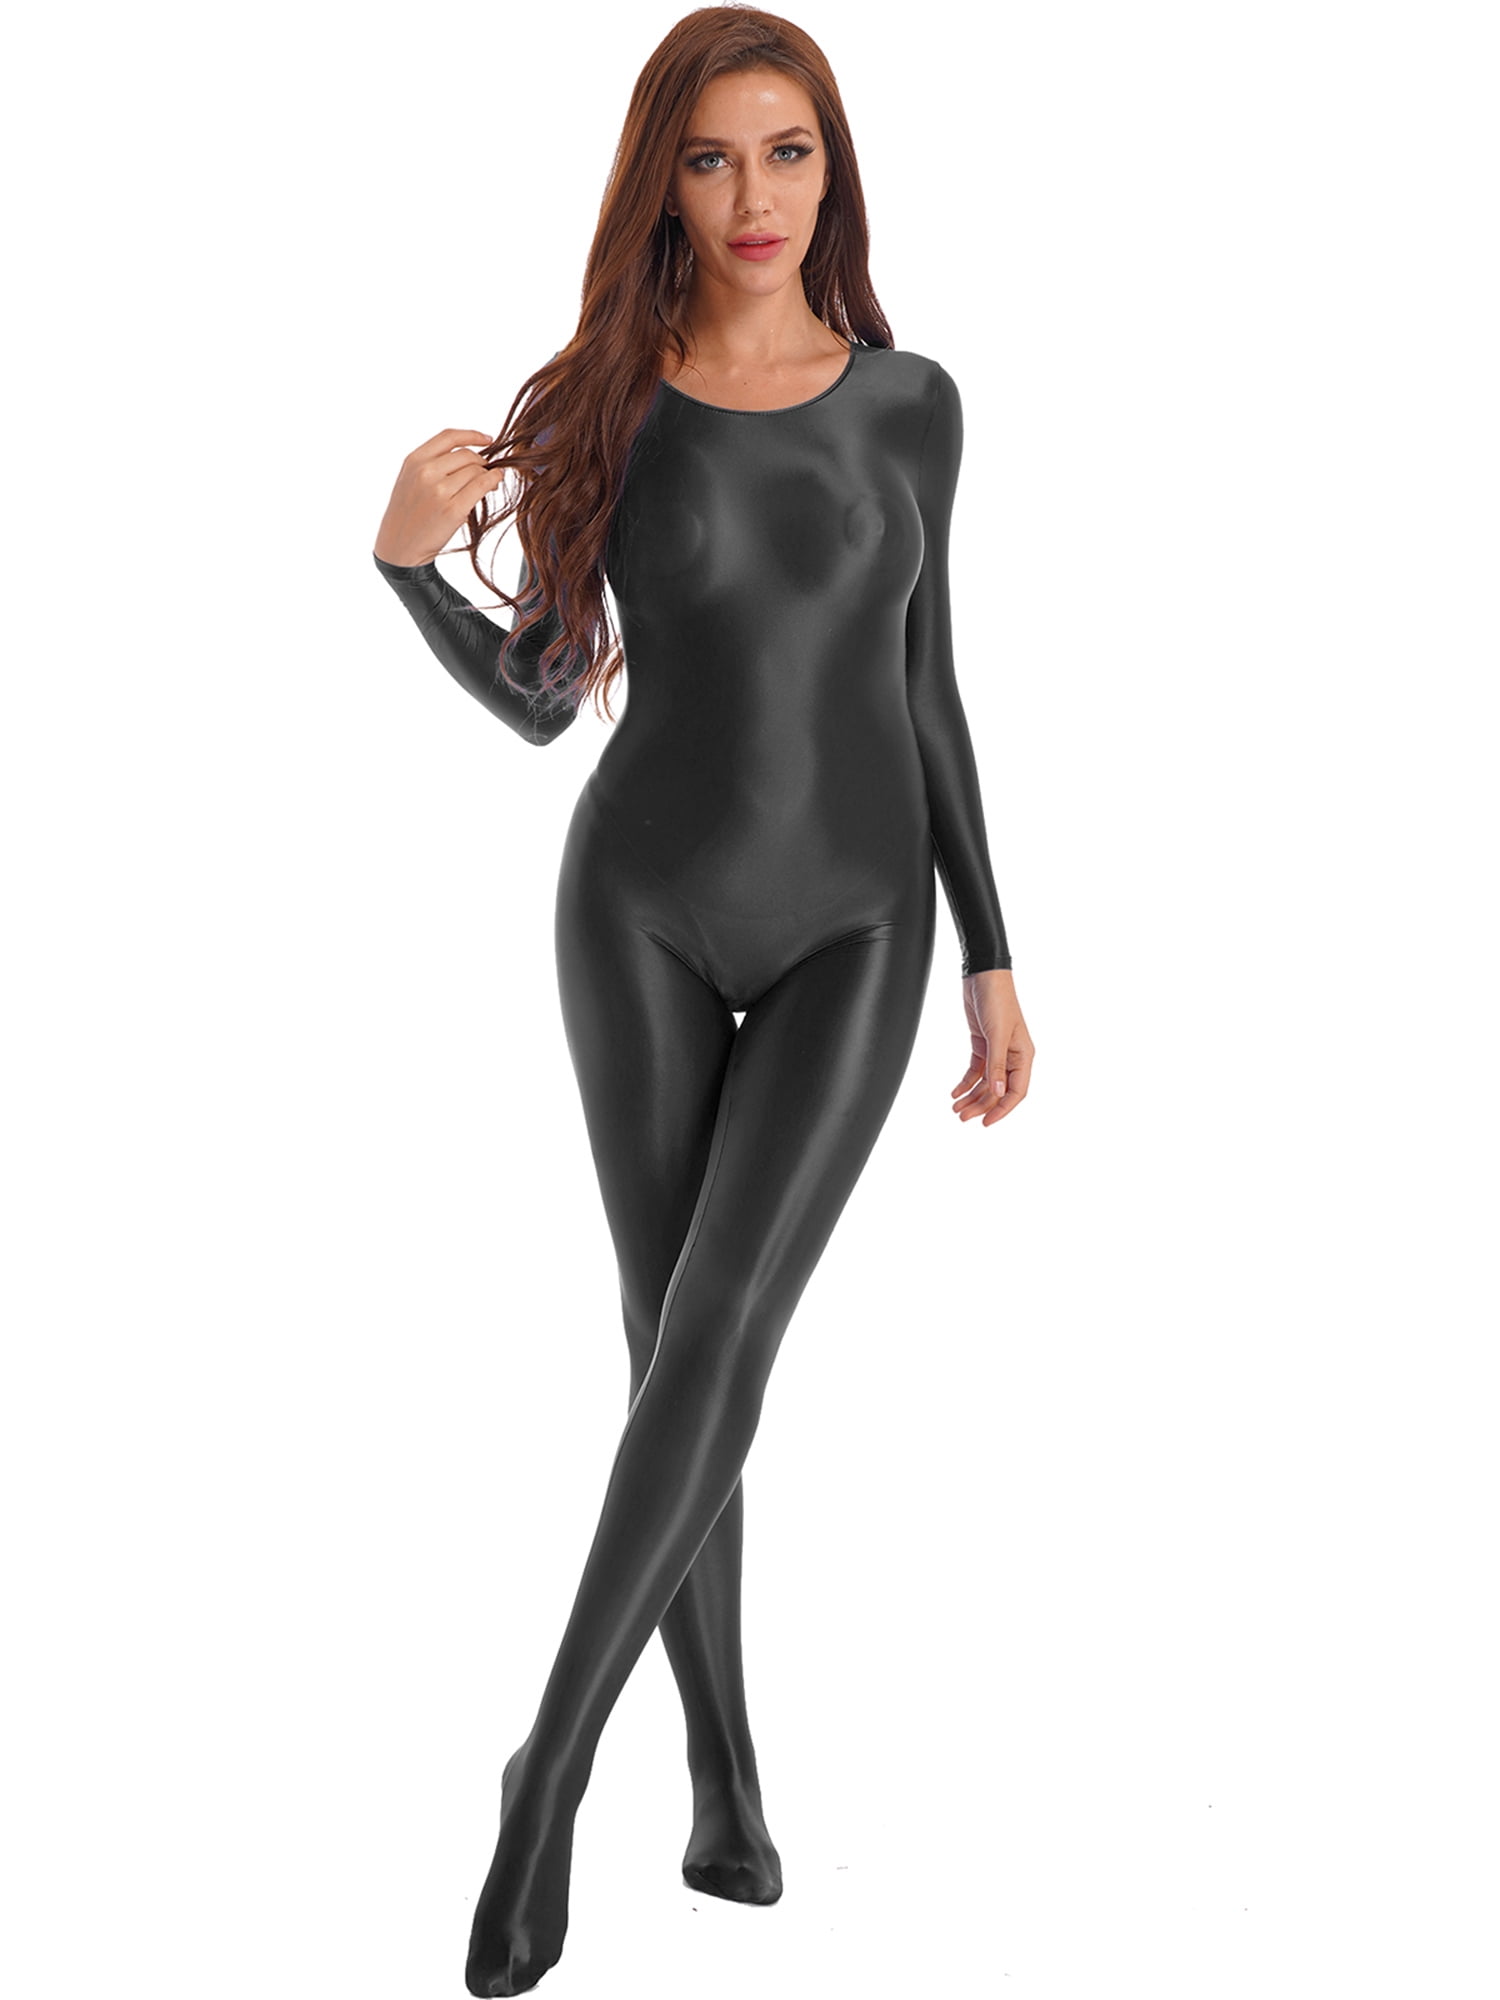 YEAHDOR Womens Full Body Long Sleeve Footed Jumpsuit Silky Shiny